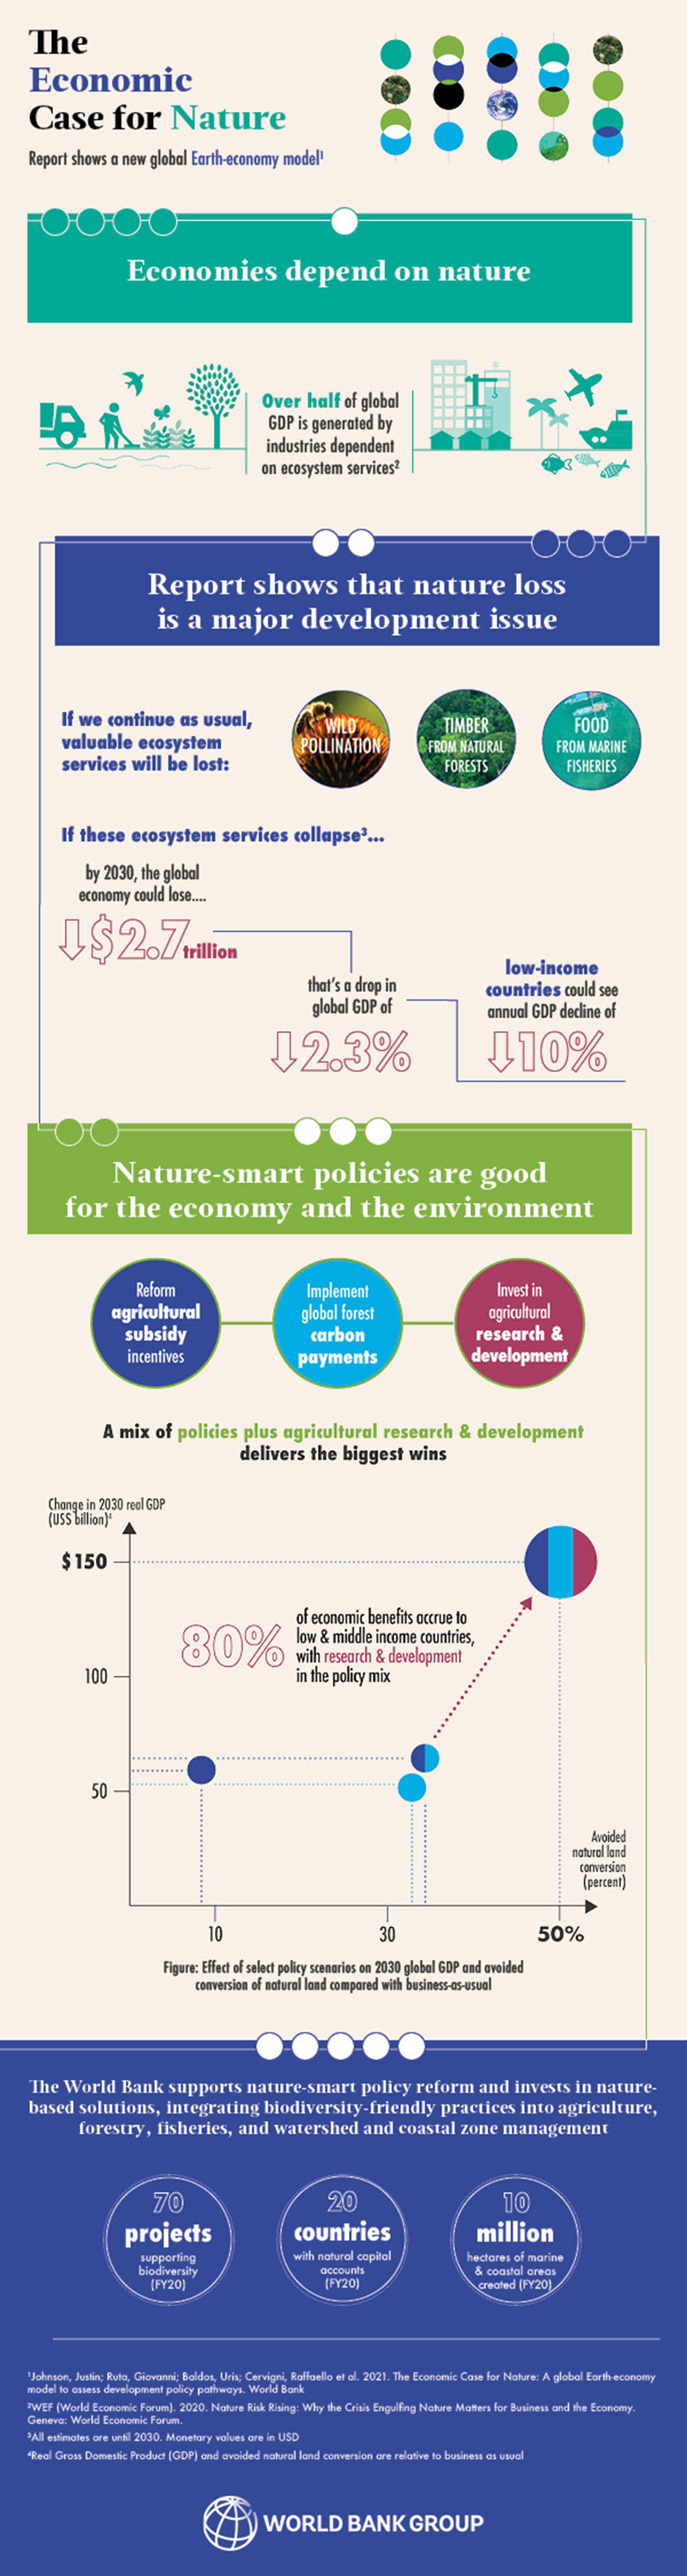 The Economic Case for Nature Infographic 